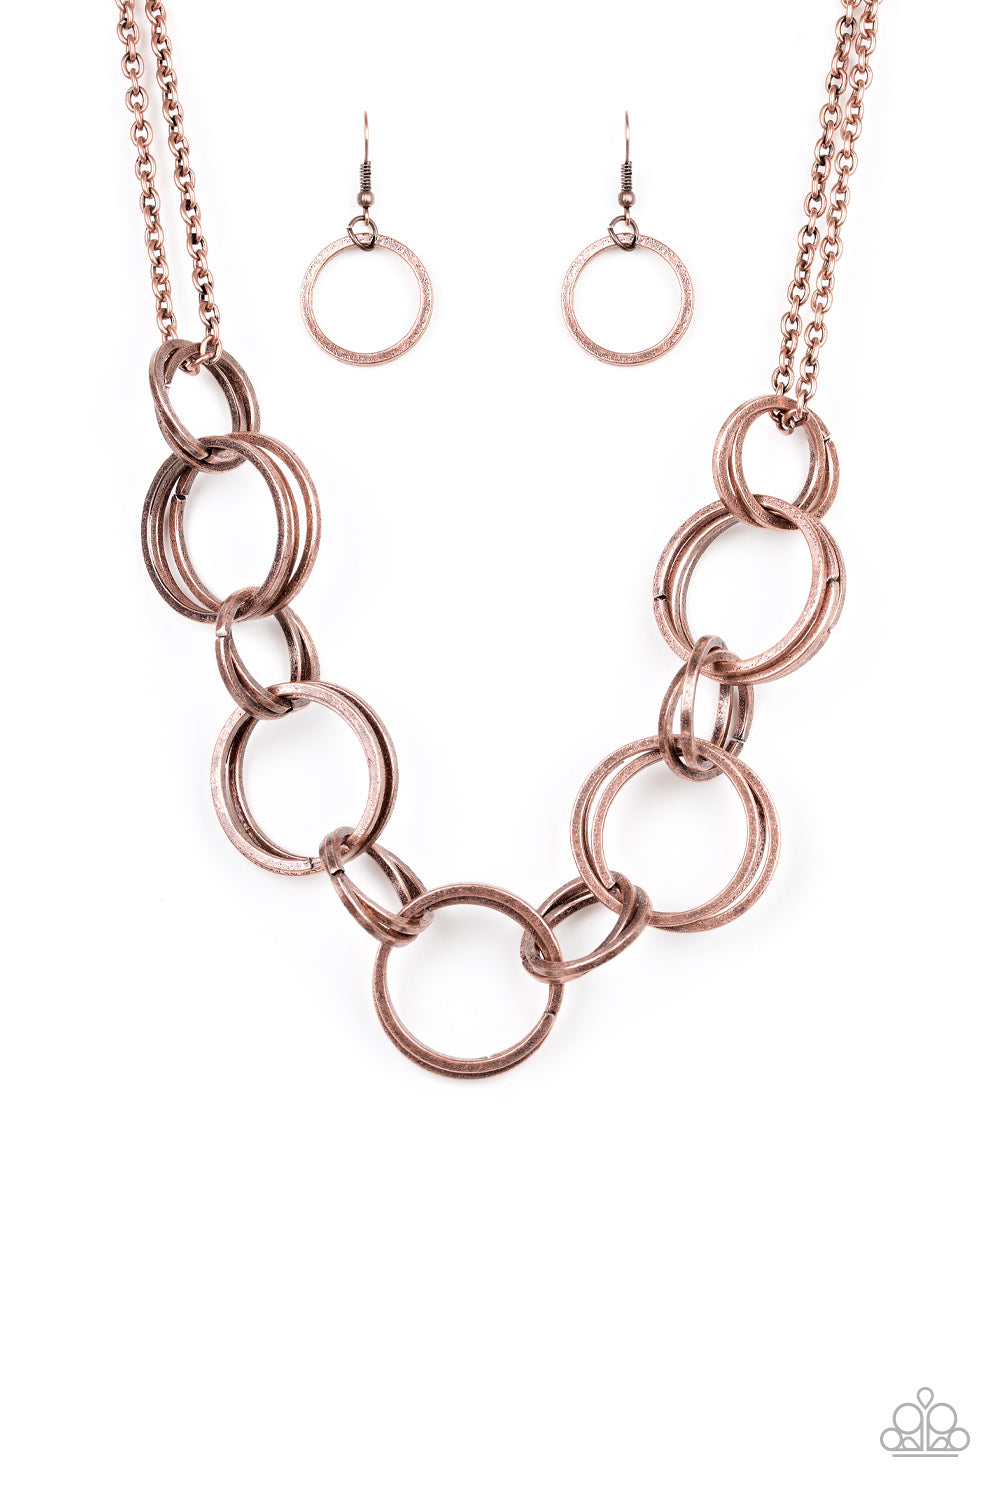 Jump Into the Ring - copper - Paparazzi necklace